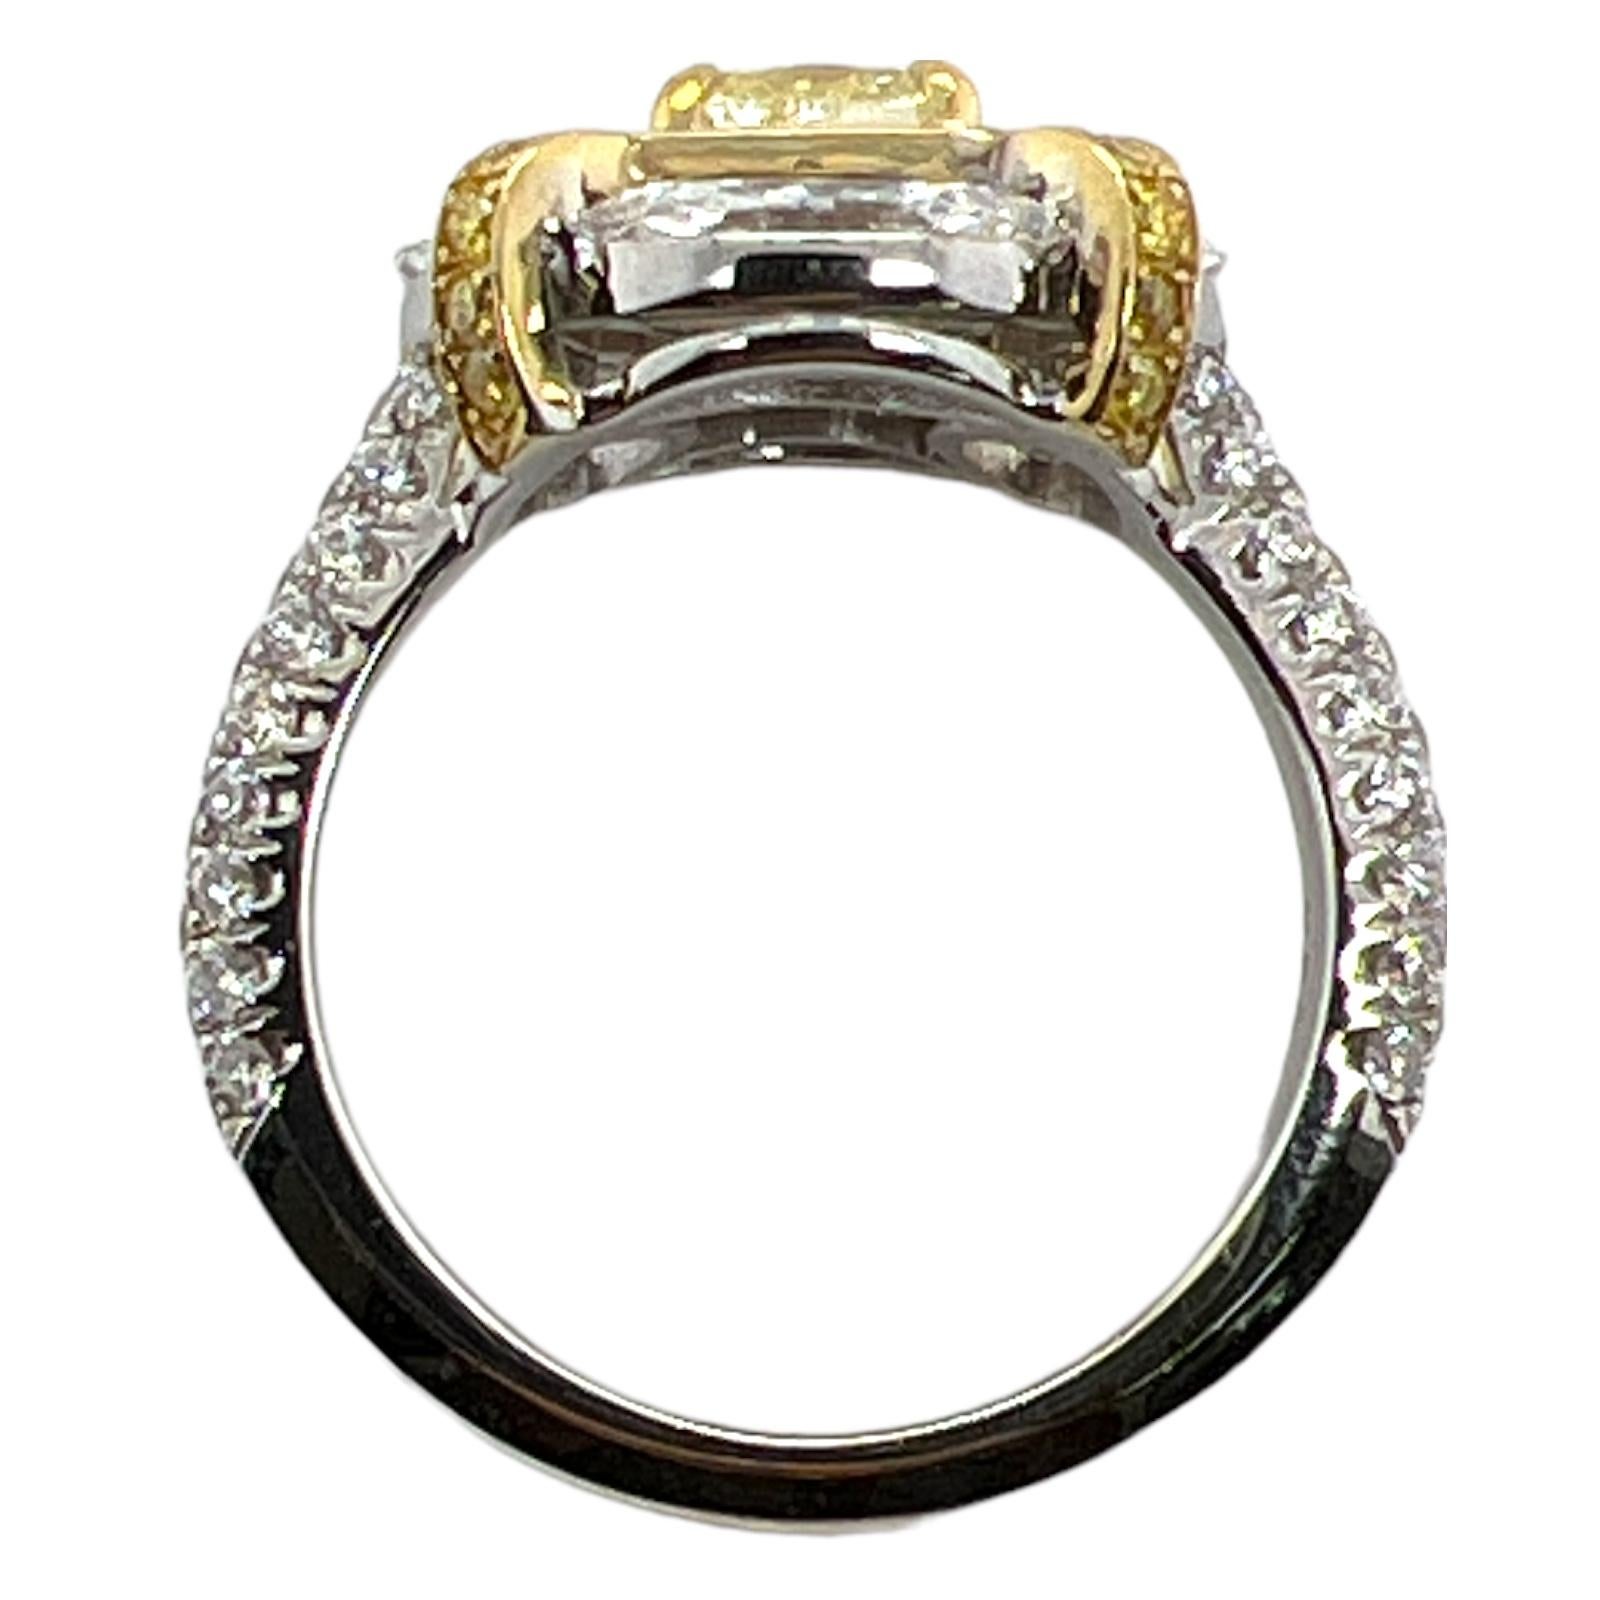 1.01 Cushion Fancy Yellow Diamond Engagement Ring 18 Karat Two Tone Gold GIA In New Condition For Sale In Boca Raton, FL